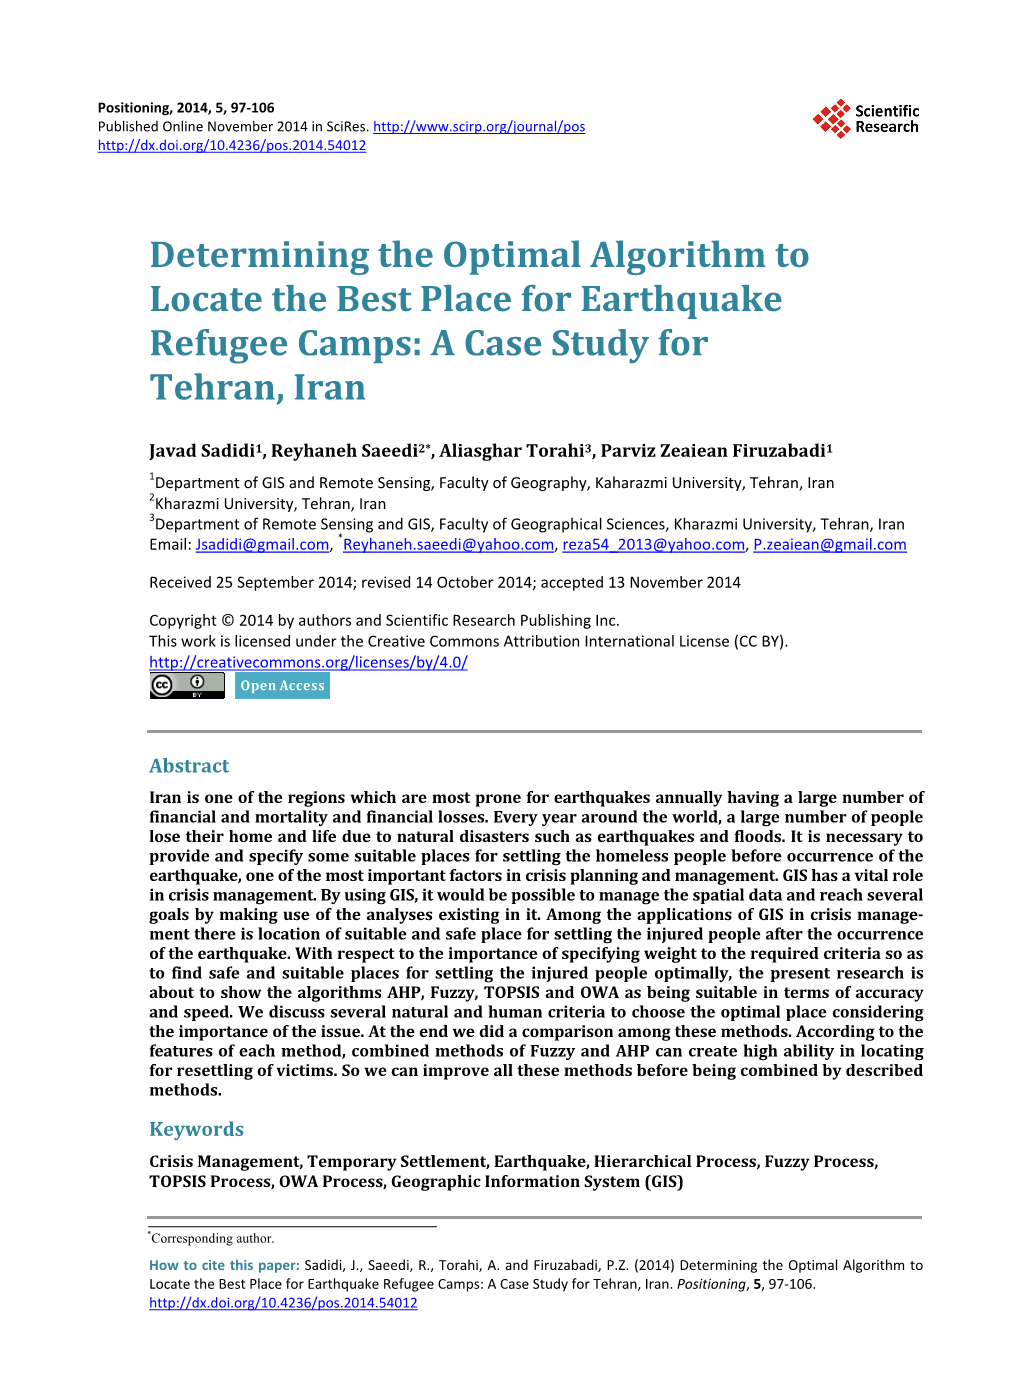 Determining the Optimal Algorithm to Locate the Best Place for Earthquake Refugee Camps: a Case Study for Tehran, Iran